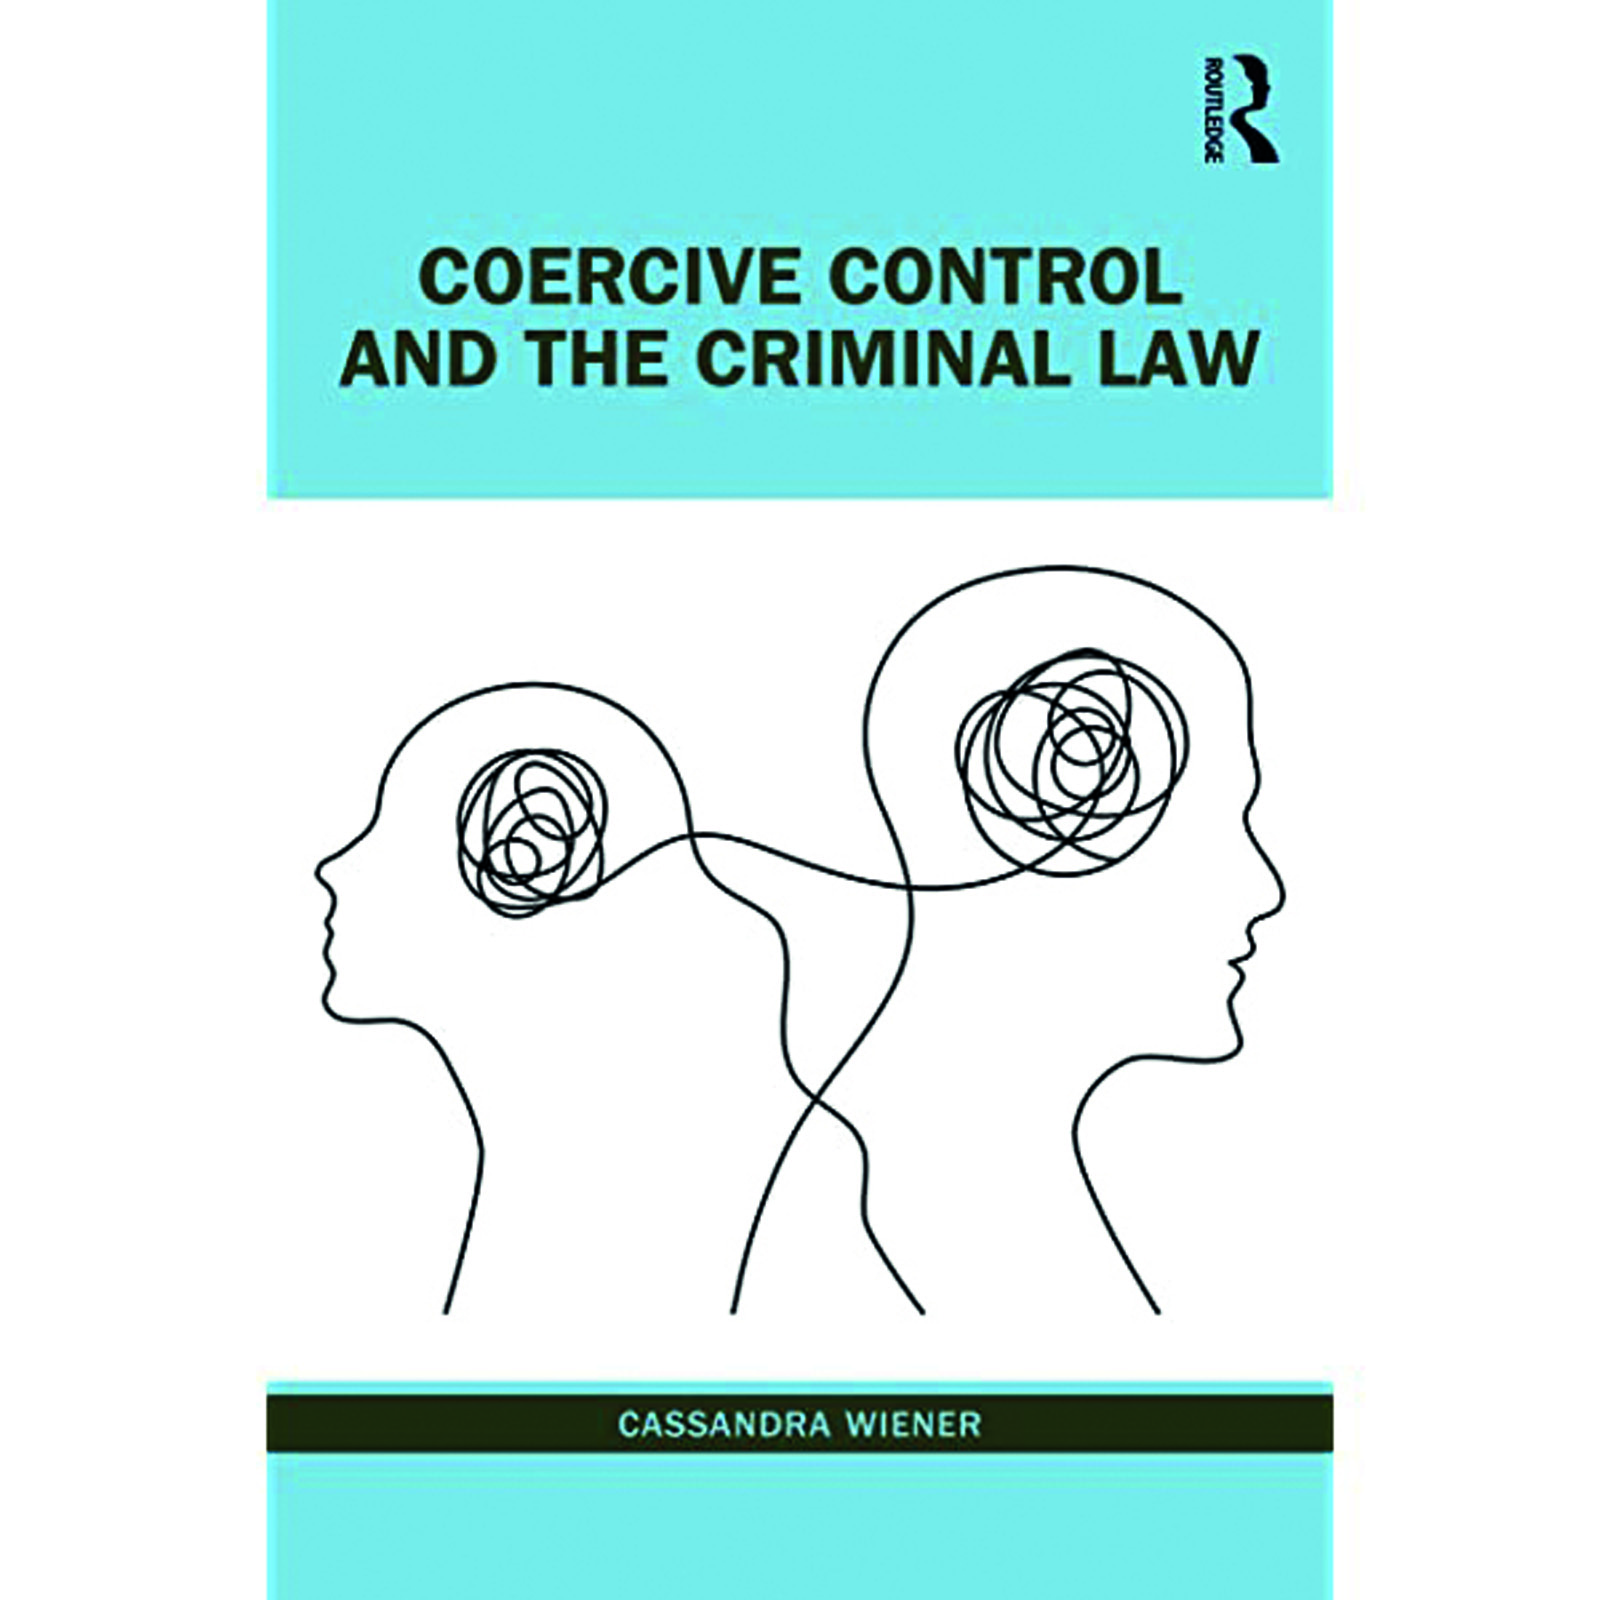 Cover, Coercive Control and the Criminal Law, by Cassandra Wiener